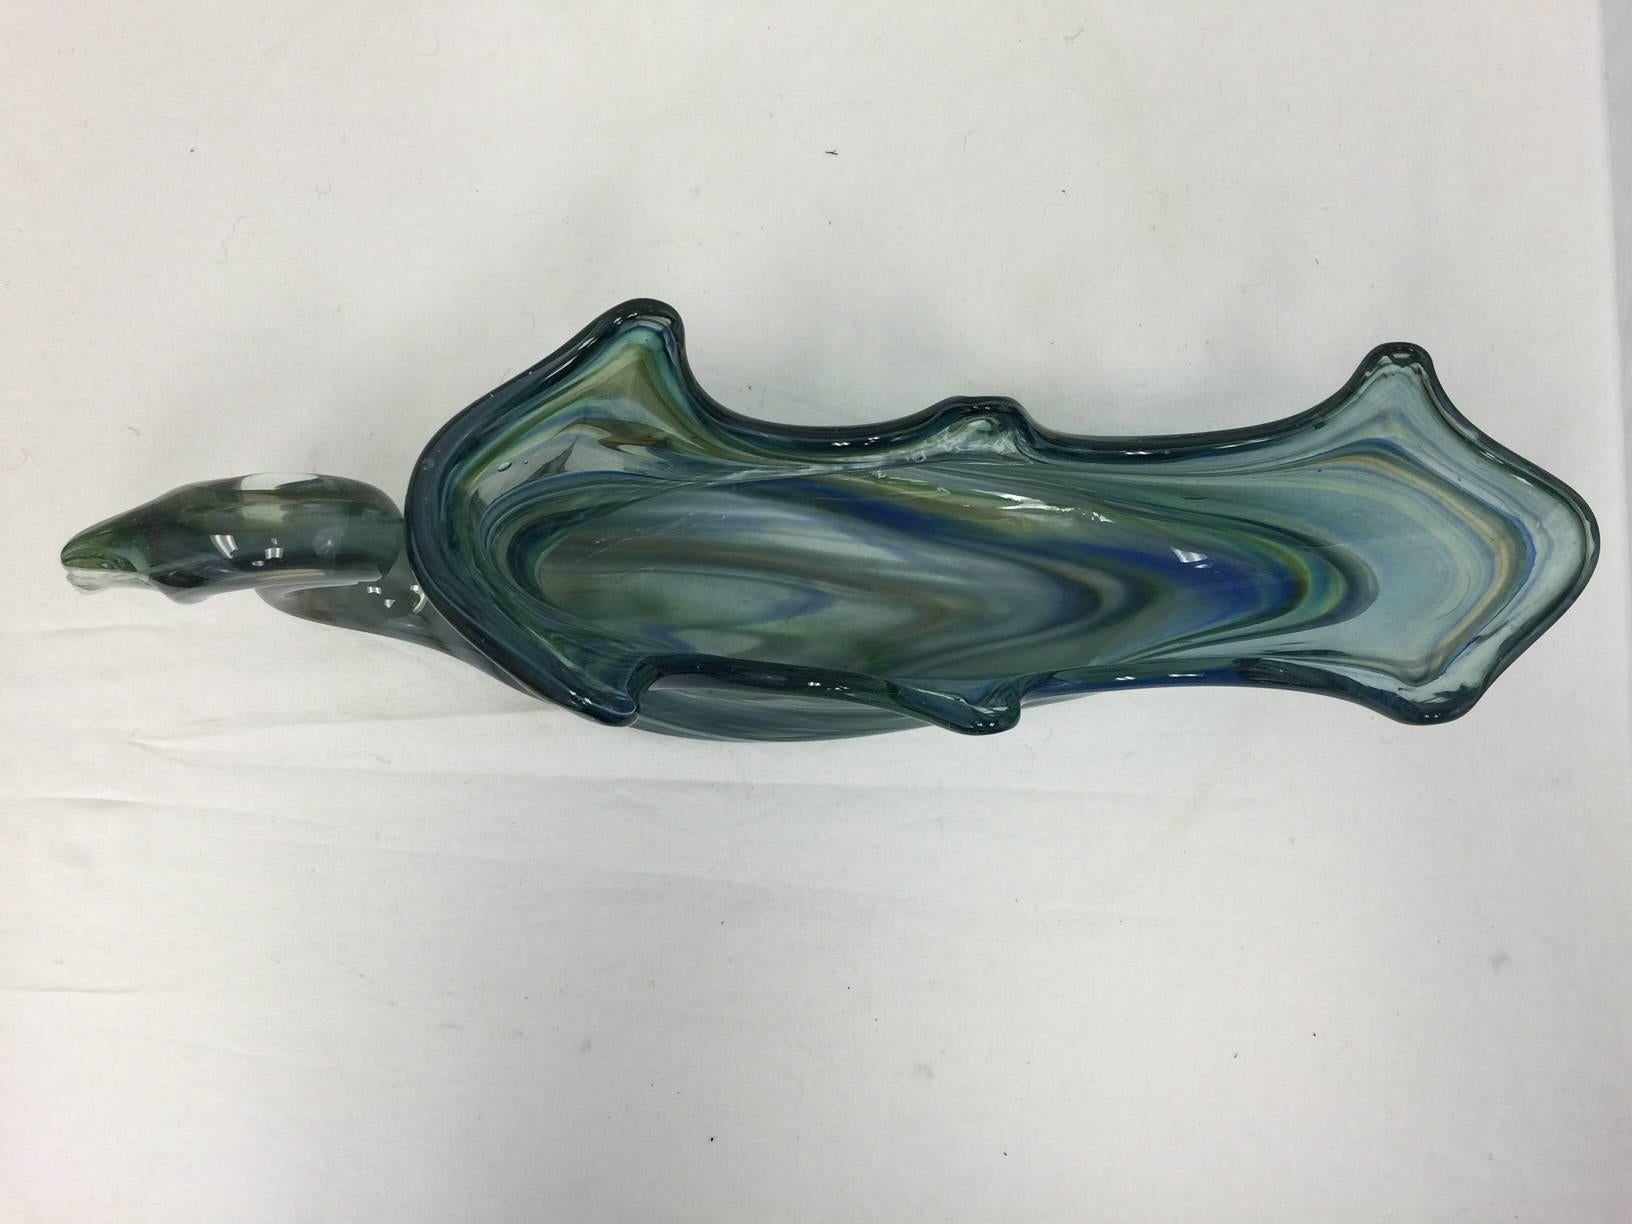 This rare Murano bowl is large enough to serve as a centerpiece bowl or a serving dish, but is delightful as a decorative sculpture. It features shades of teal, smoke and olive. Perfect condition.